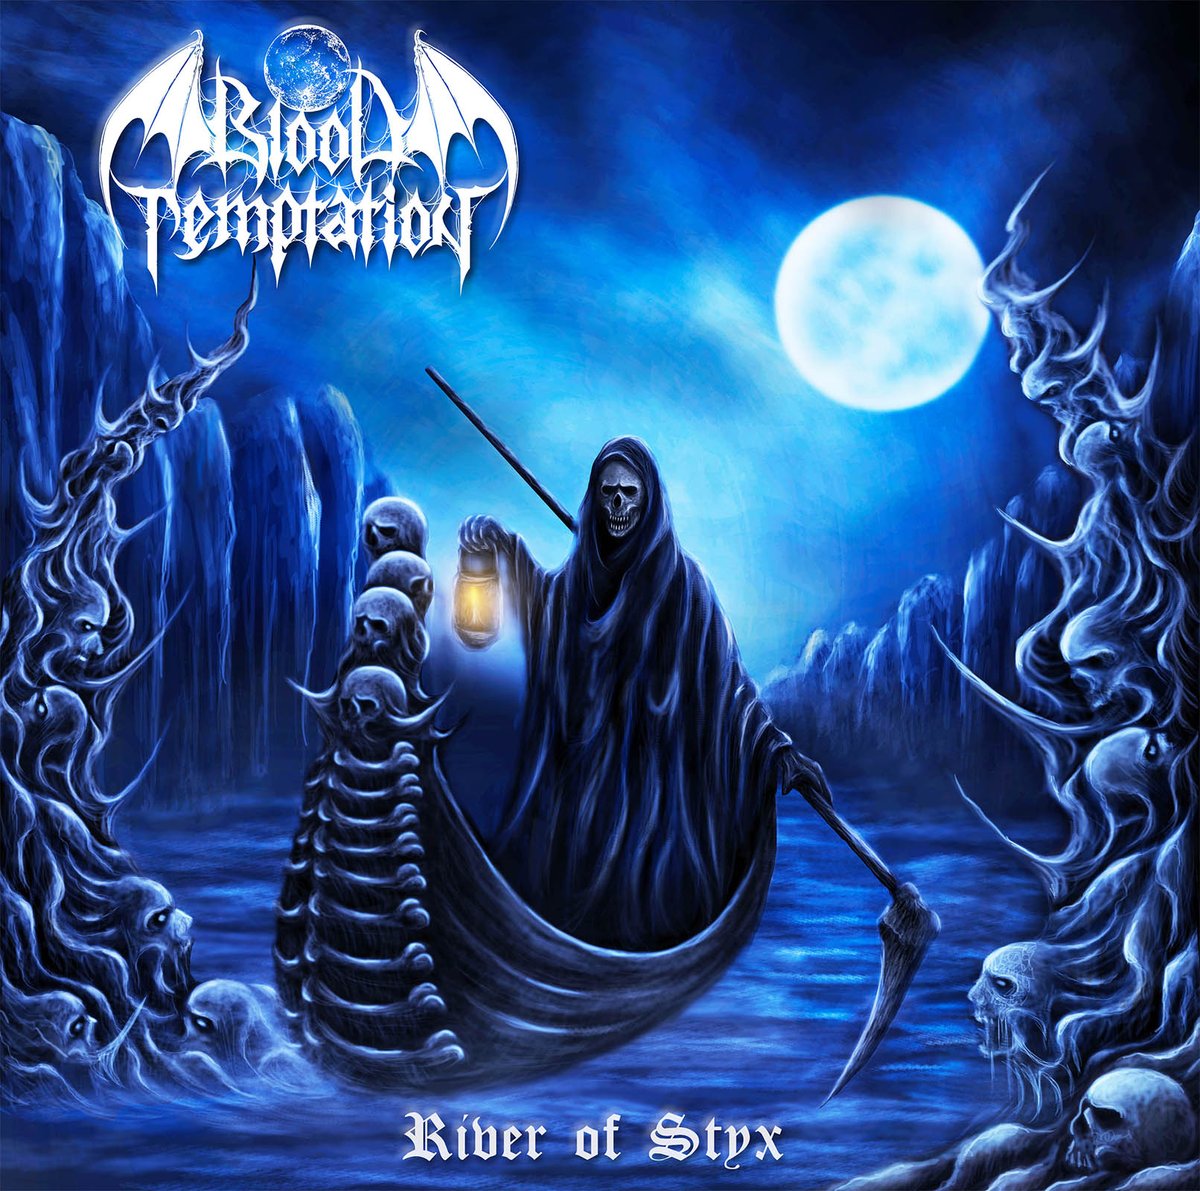 The very first Blood Temptation Full Length Album has been Recorded 
Eight Tracks of Soul Possessing Blackened Death Metal.
The new album entitled “River of Styx' will be released this year.  #bloodtemptation #Deathmetal #blackmetal #deathblackmetal #losAngelesMetal #thrashmetal